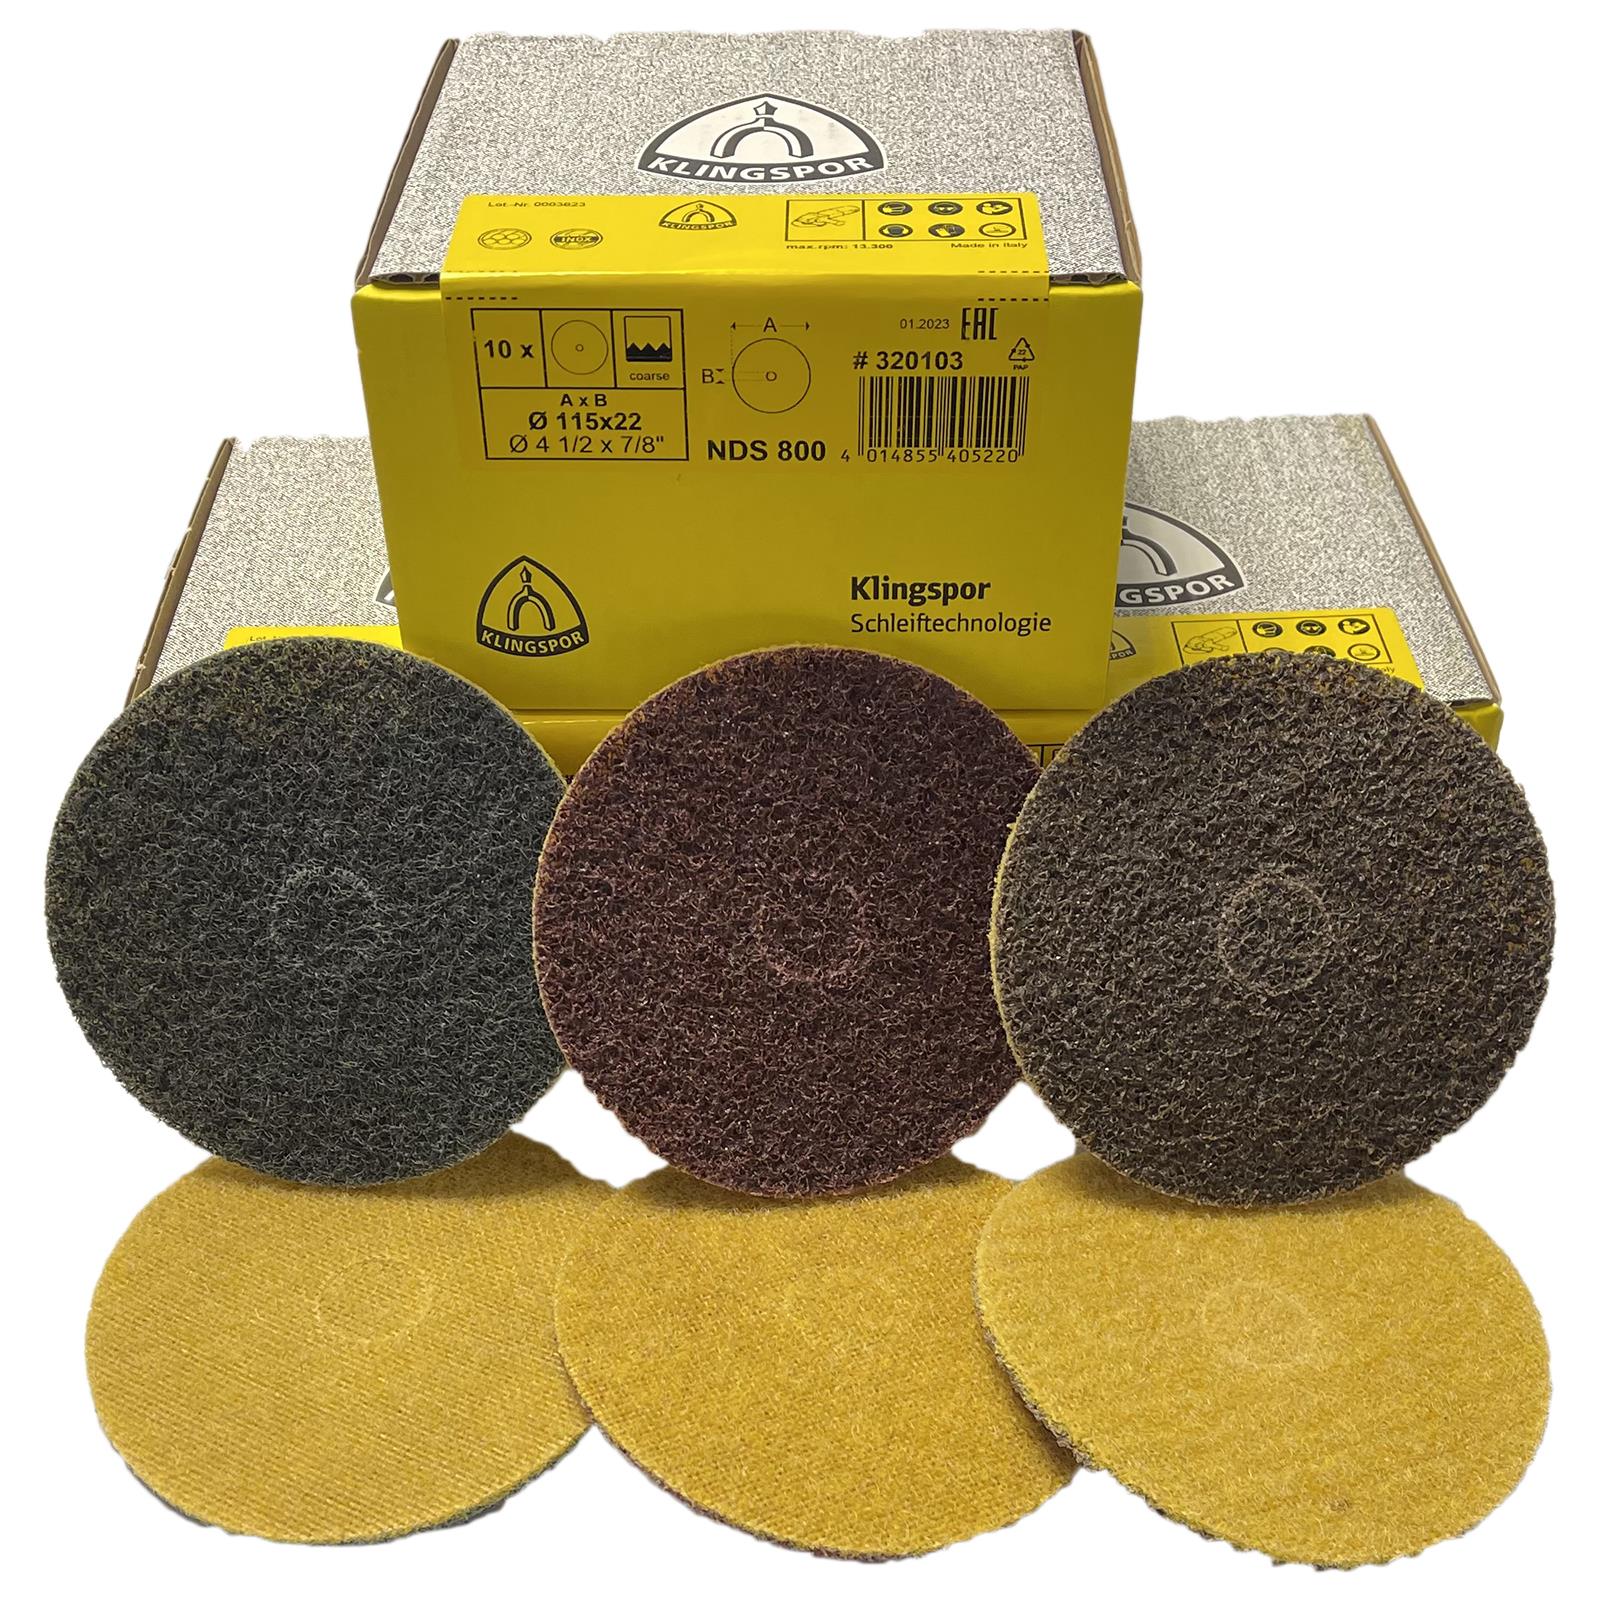 Klingspor Non Woven Web Discs for Metals Stainless Steel Like Scotch Brite 115mm